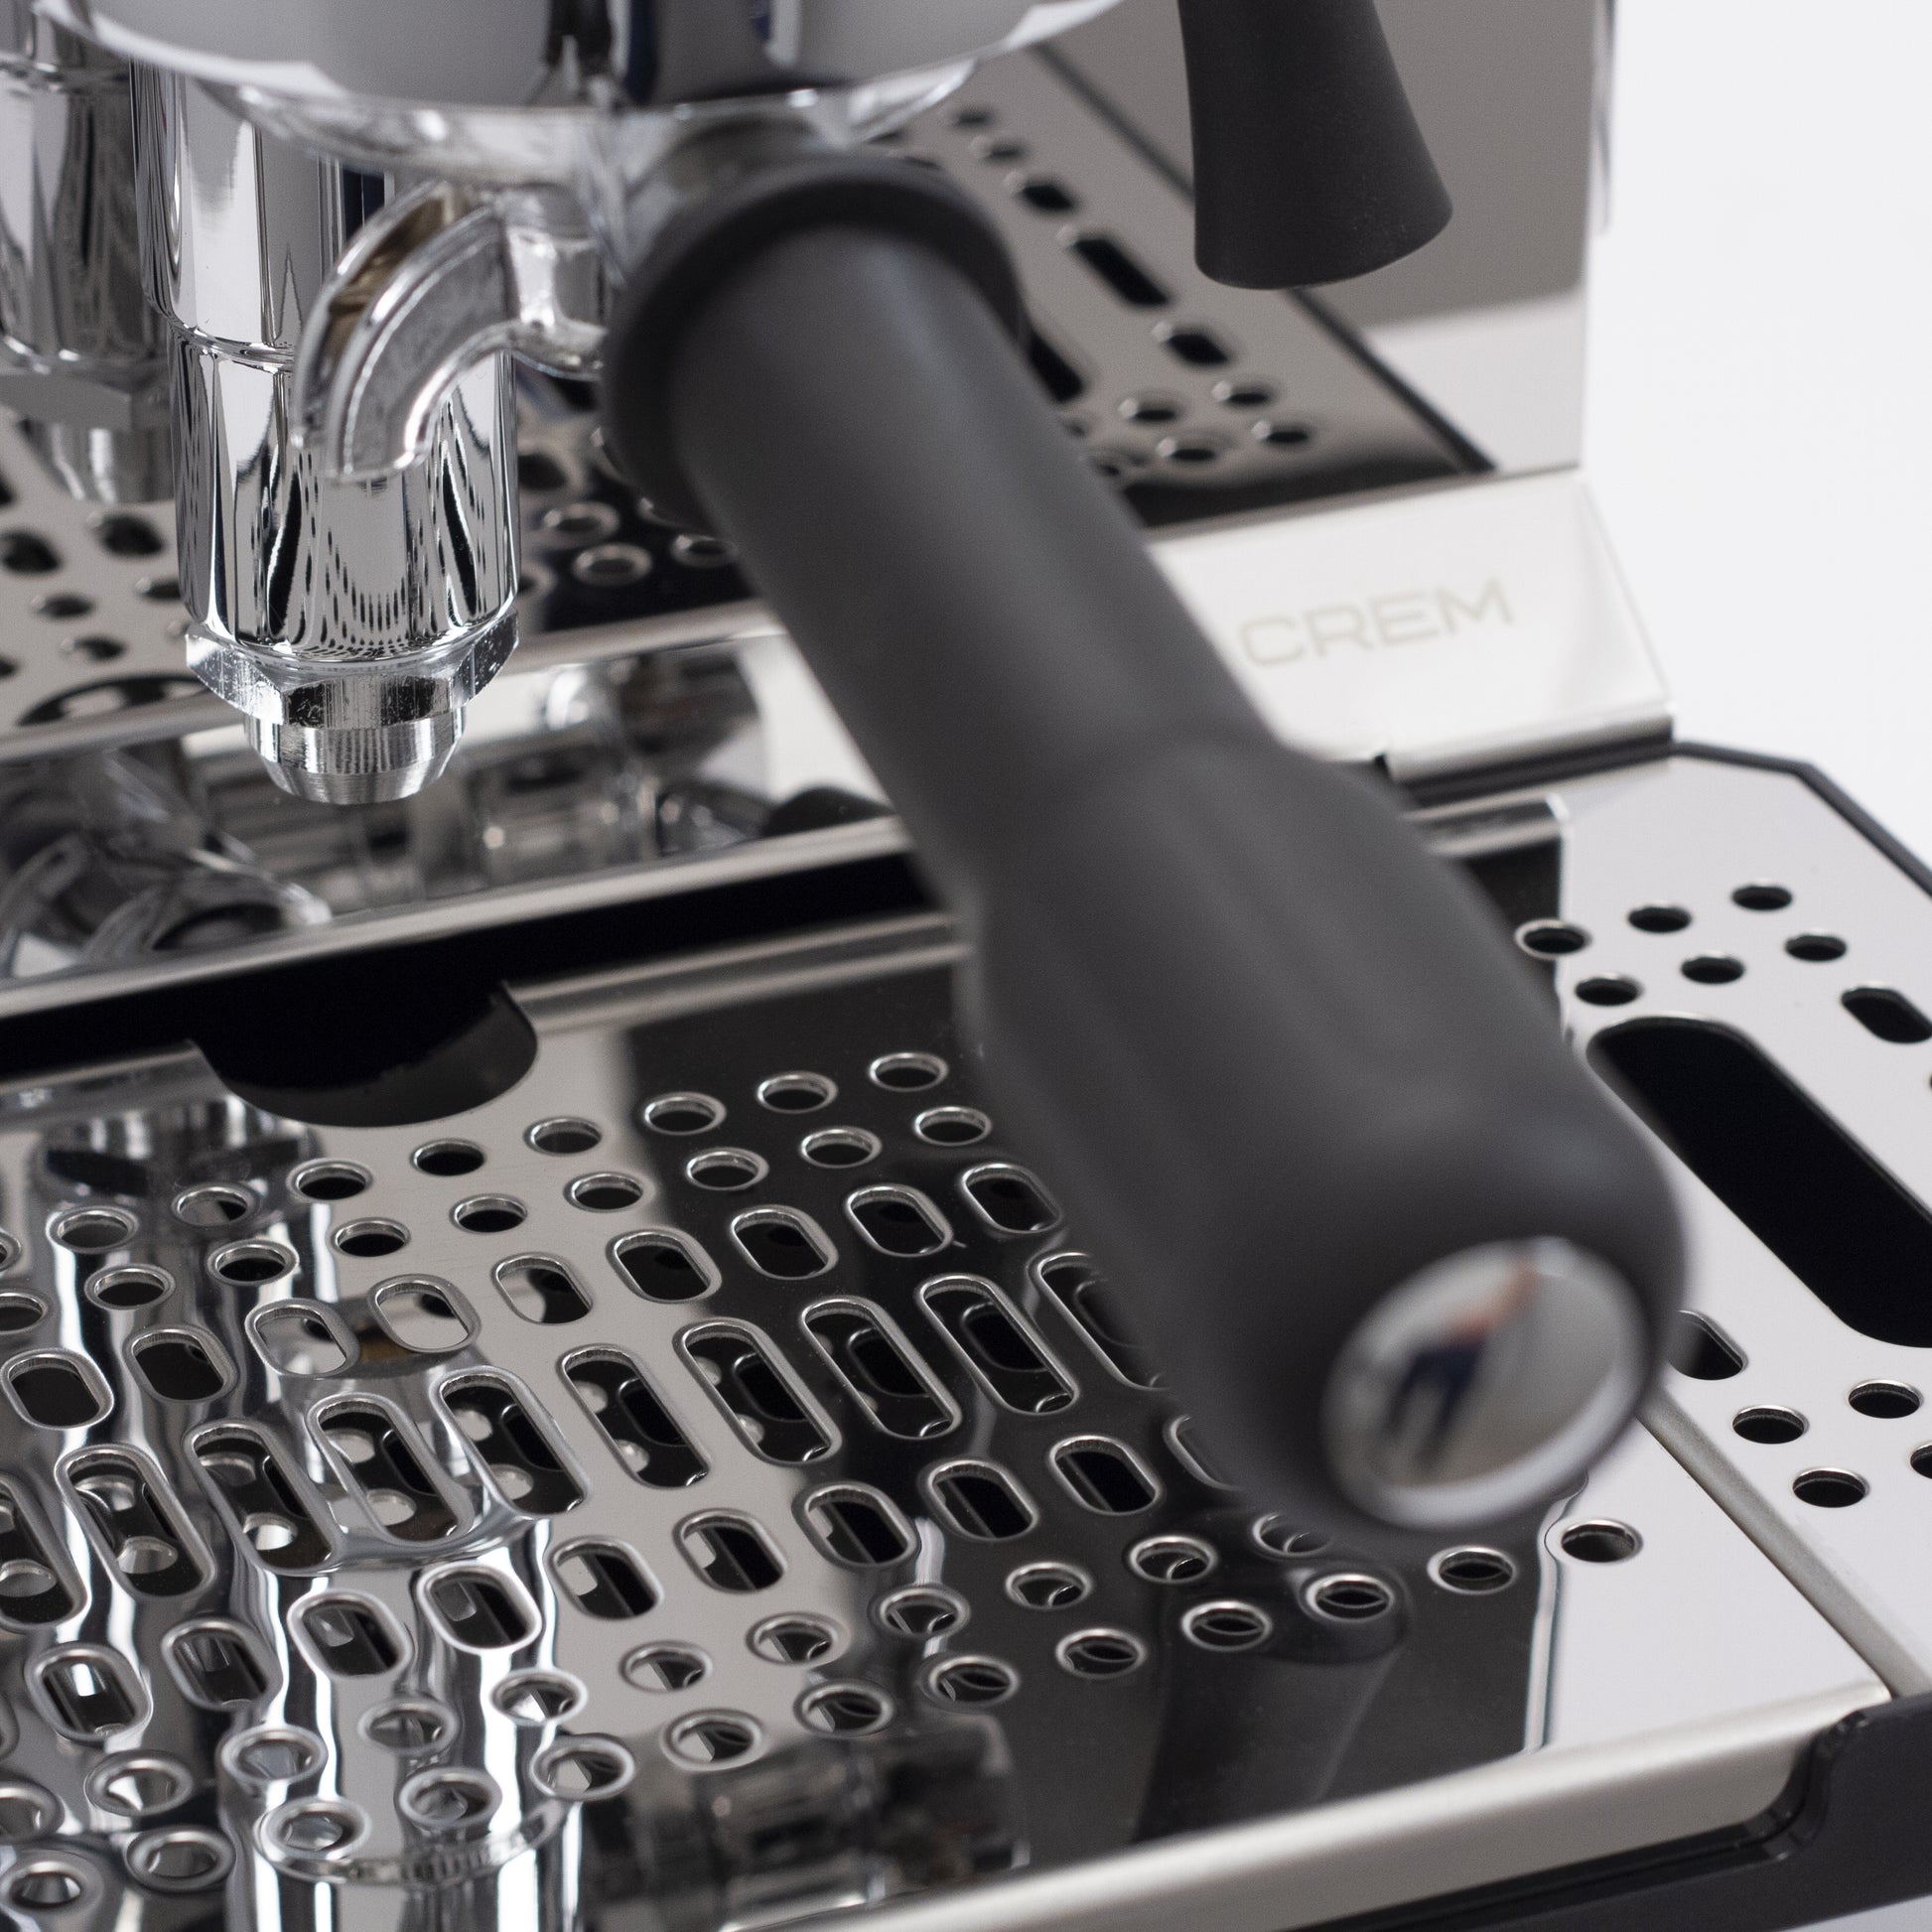 The CREM ONE HX PID has a massive drip tray for a large work surface.